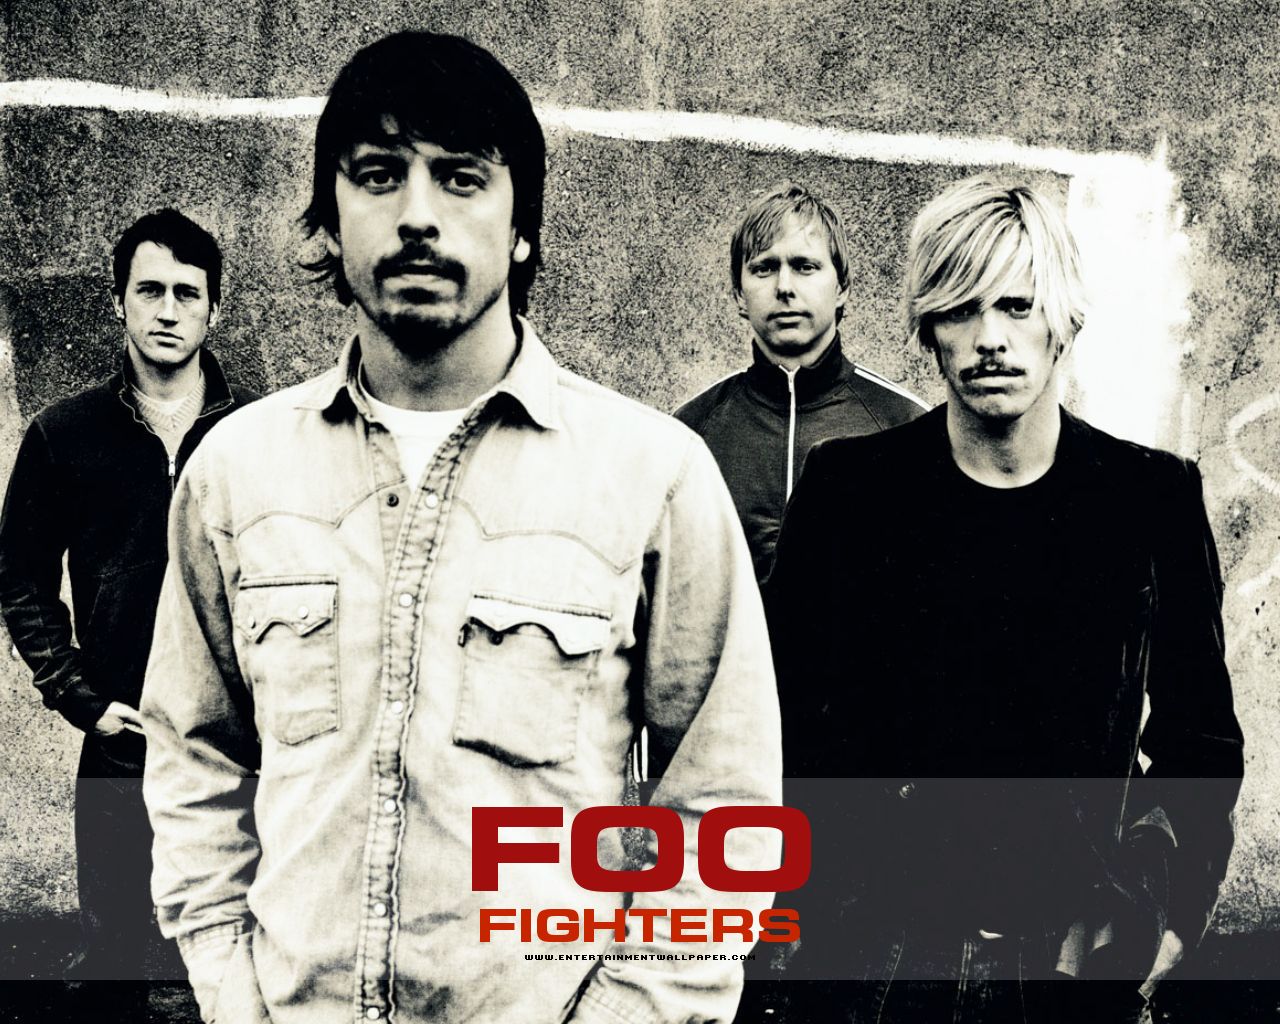 foo fighters wallpaper,font,album cover,photography,team